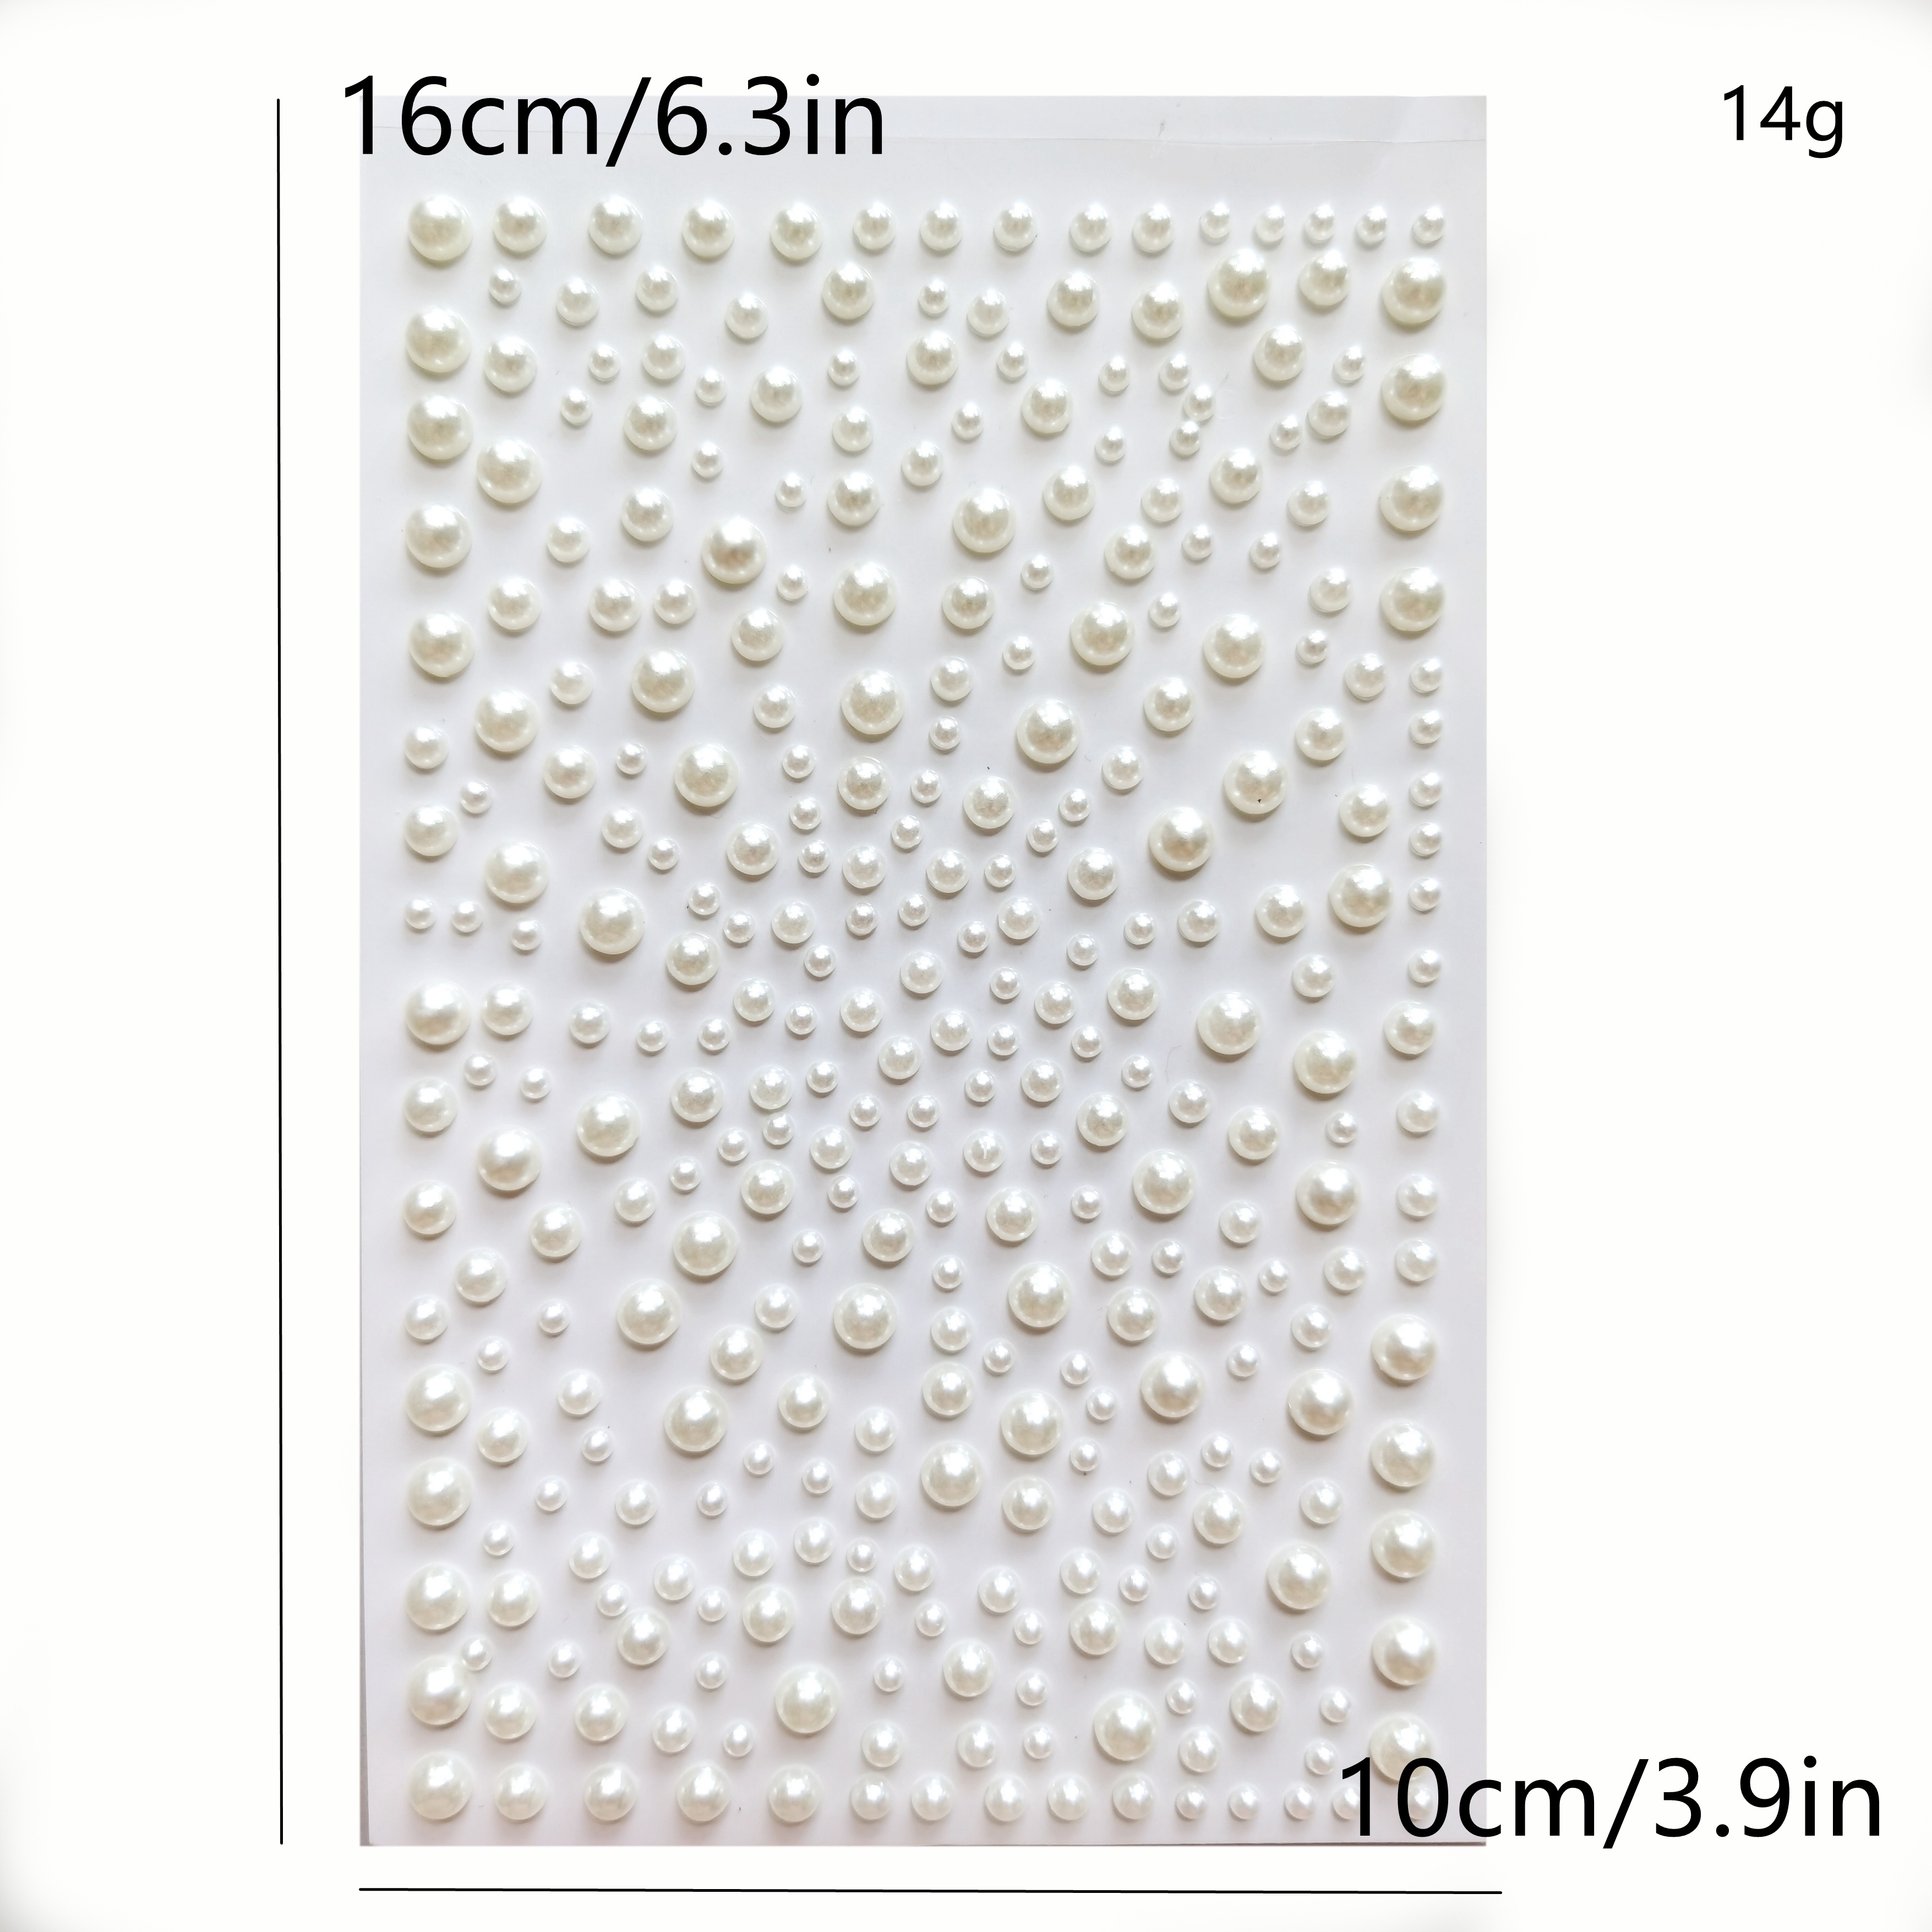 2150 Pcs Self Adhesive Pearl Stickers, White Flat Back Pearls Sticker for  Face Beauty Makeup Nail Art Cell Phone DIY Crafts Home Decor Scrapbooking